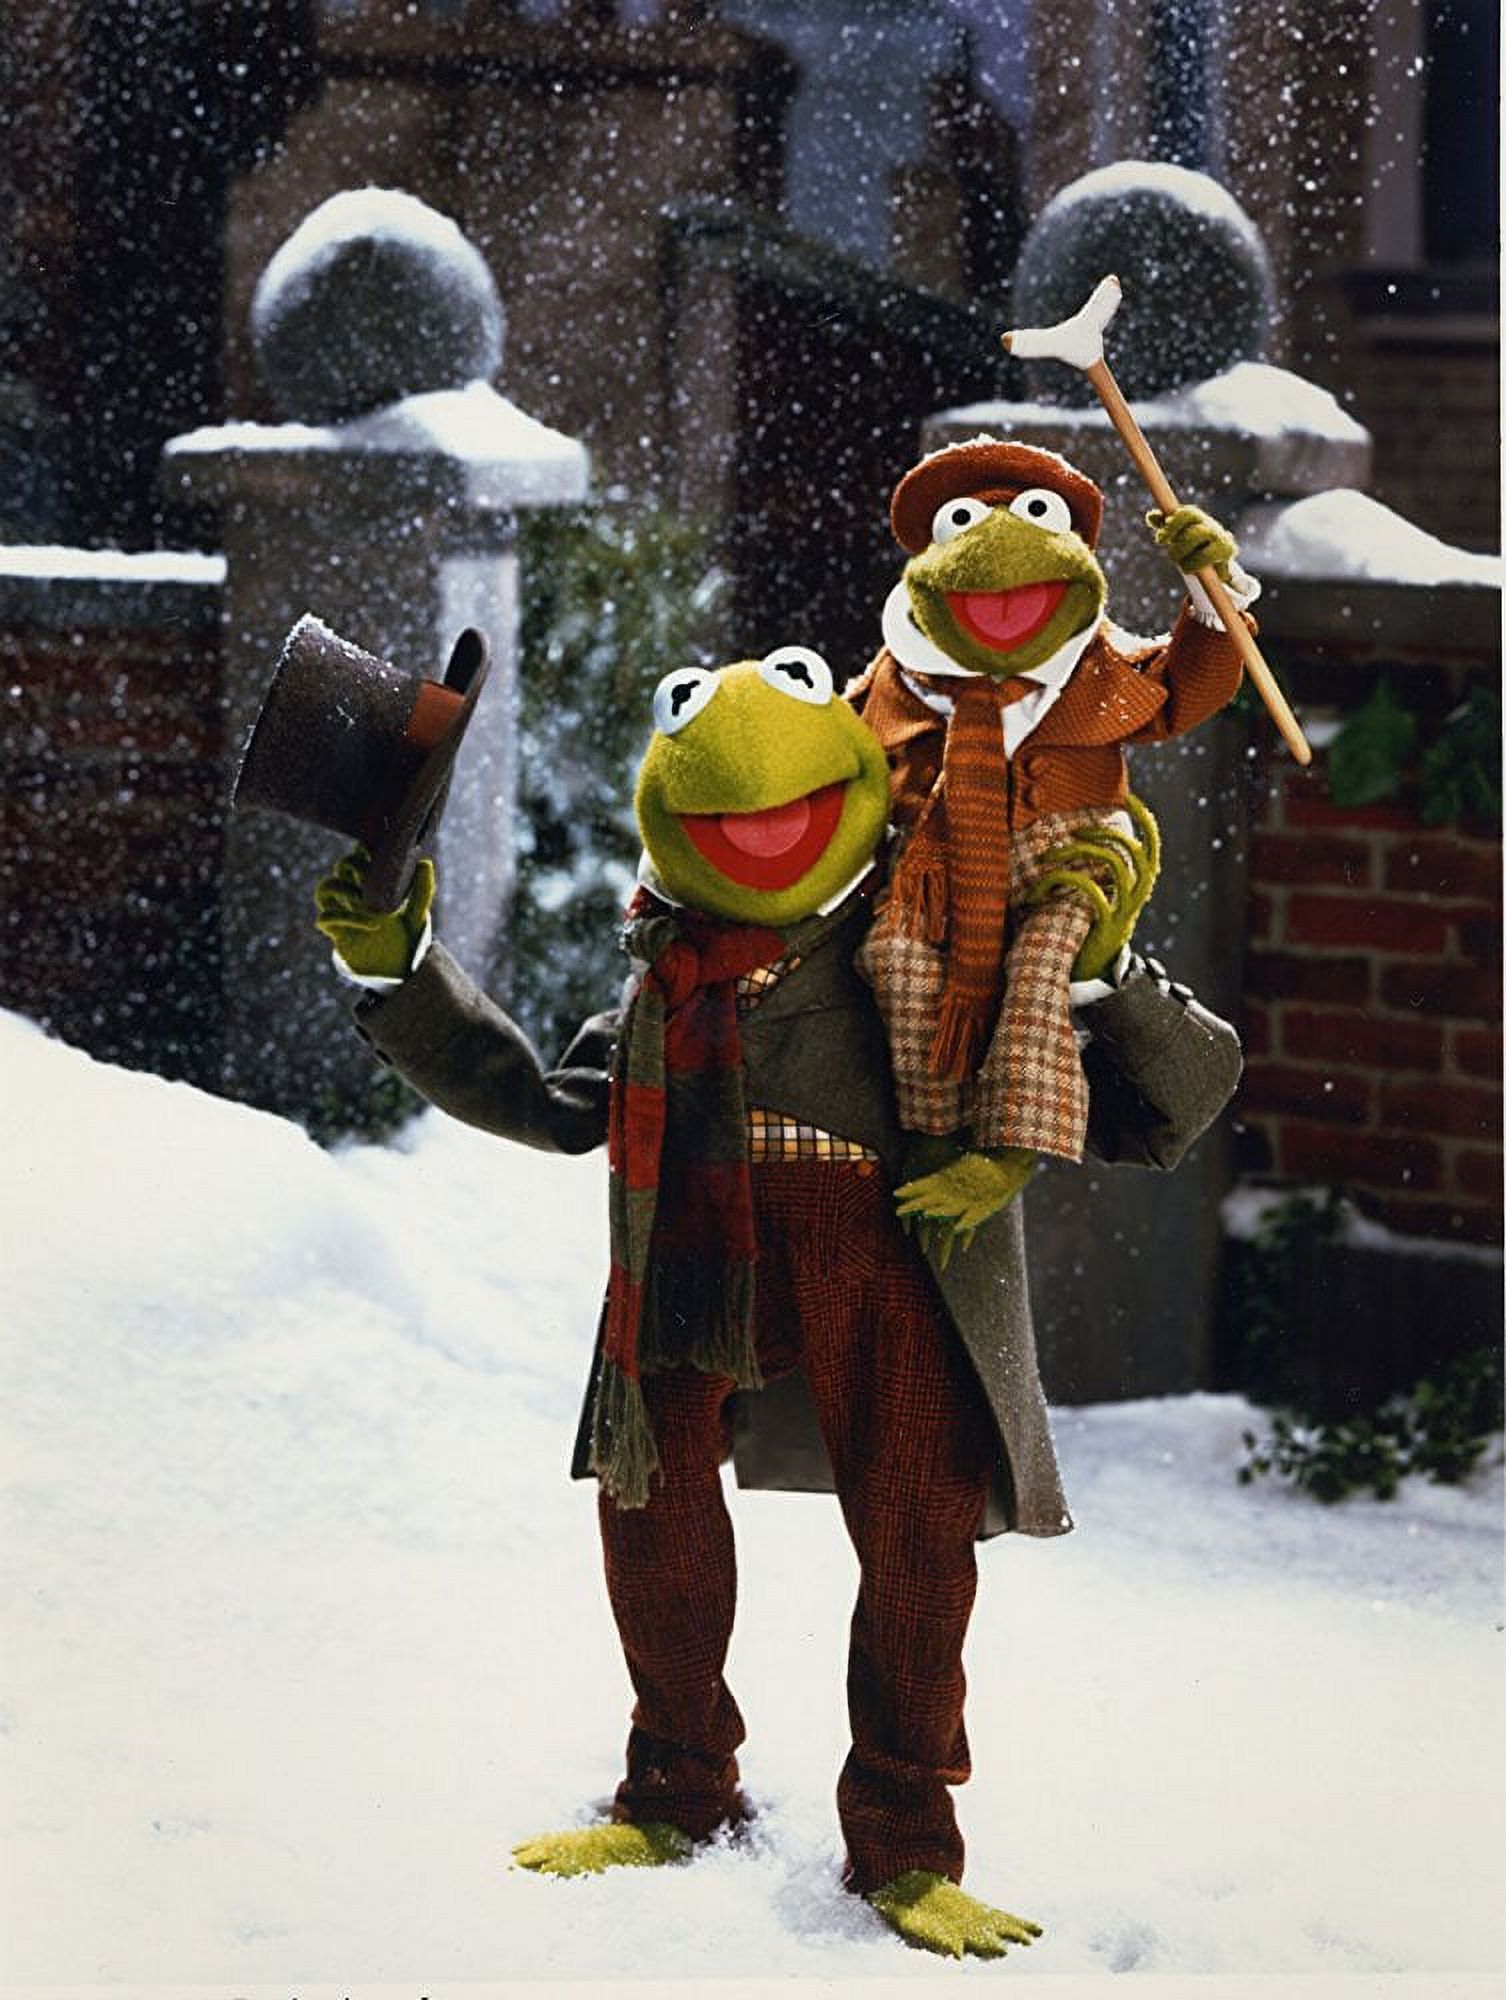 The Muppet Christmas Carol (Special Edition) (Blu-ray) - image 3 of 5